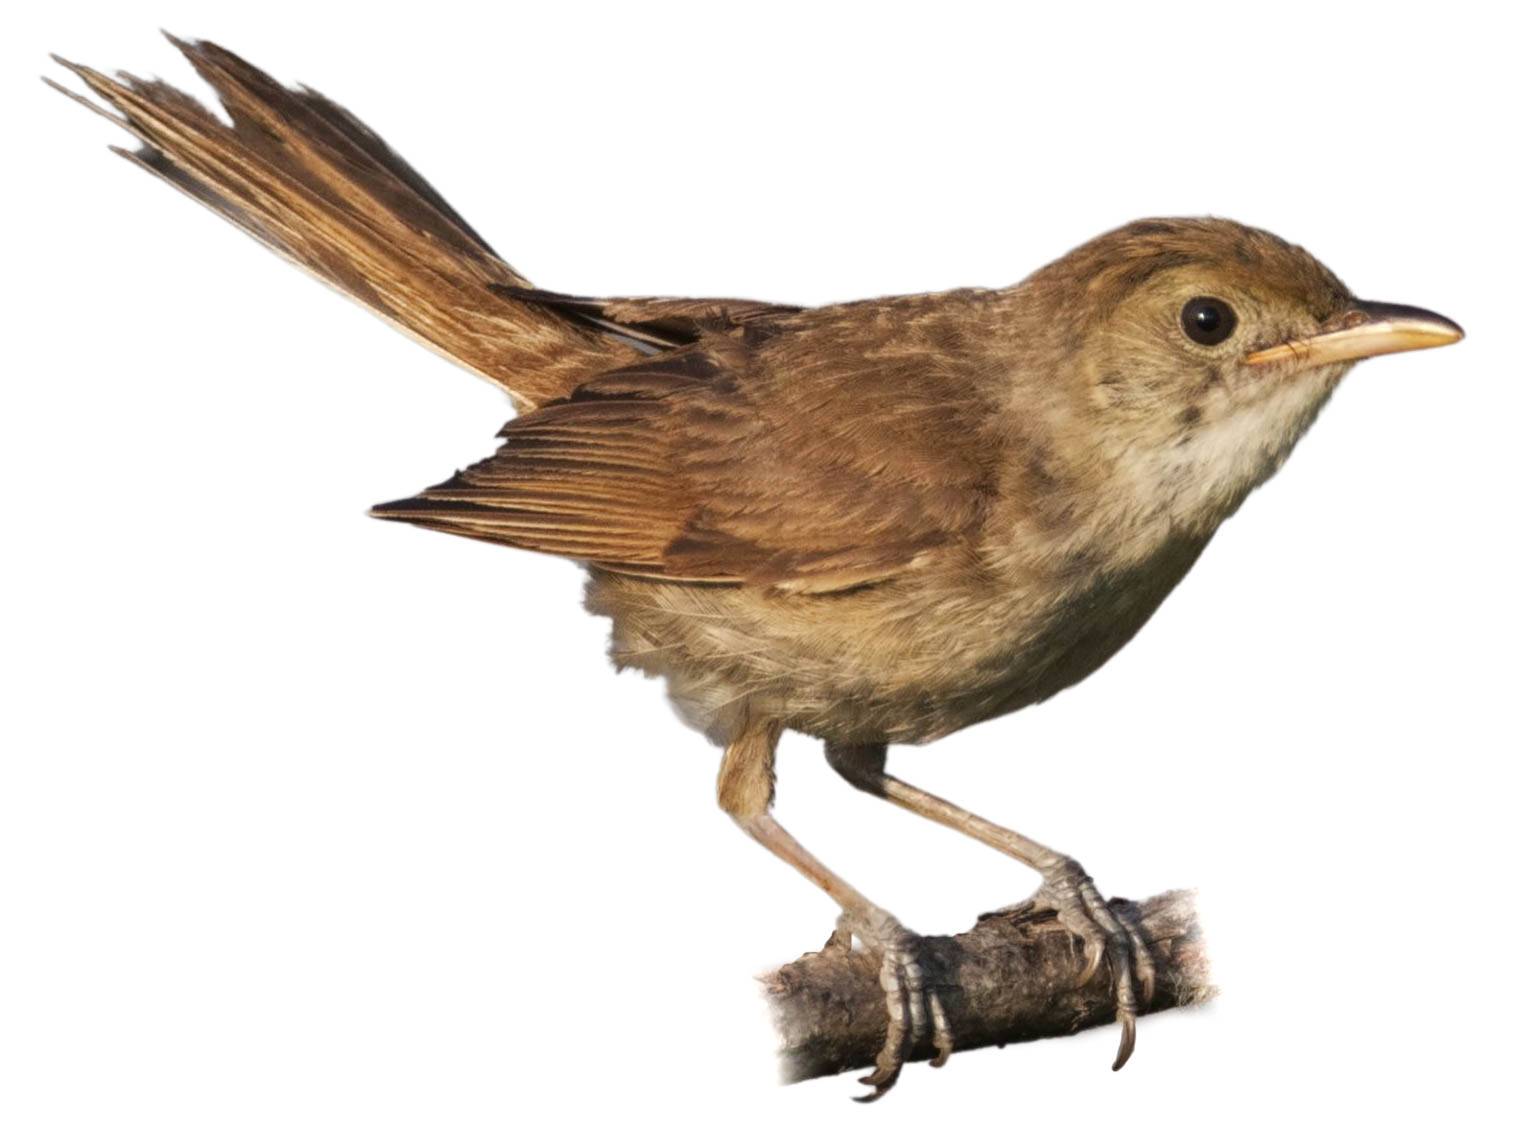 A photo of a Thick-billed Warbler (Arundinax aedon)